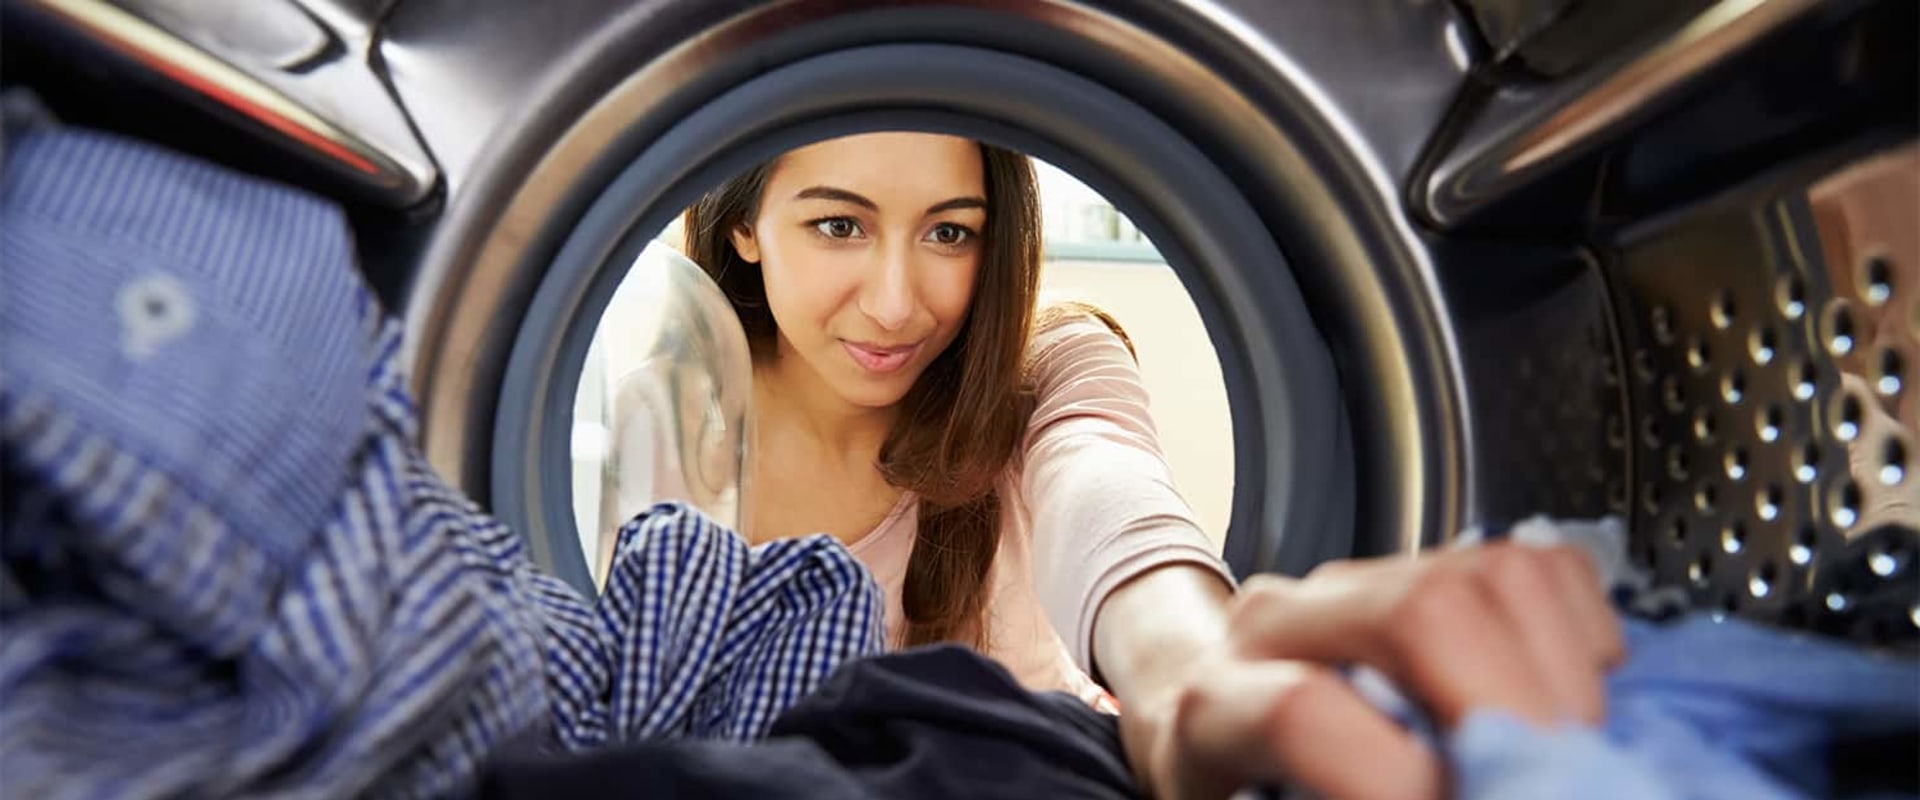 How Often Should You Have Your Clothes Dryer Inspected by a Professional Service?